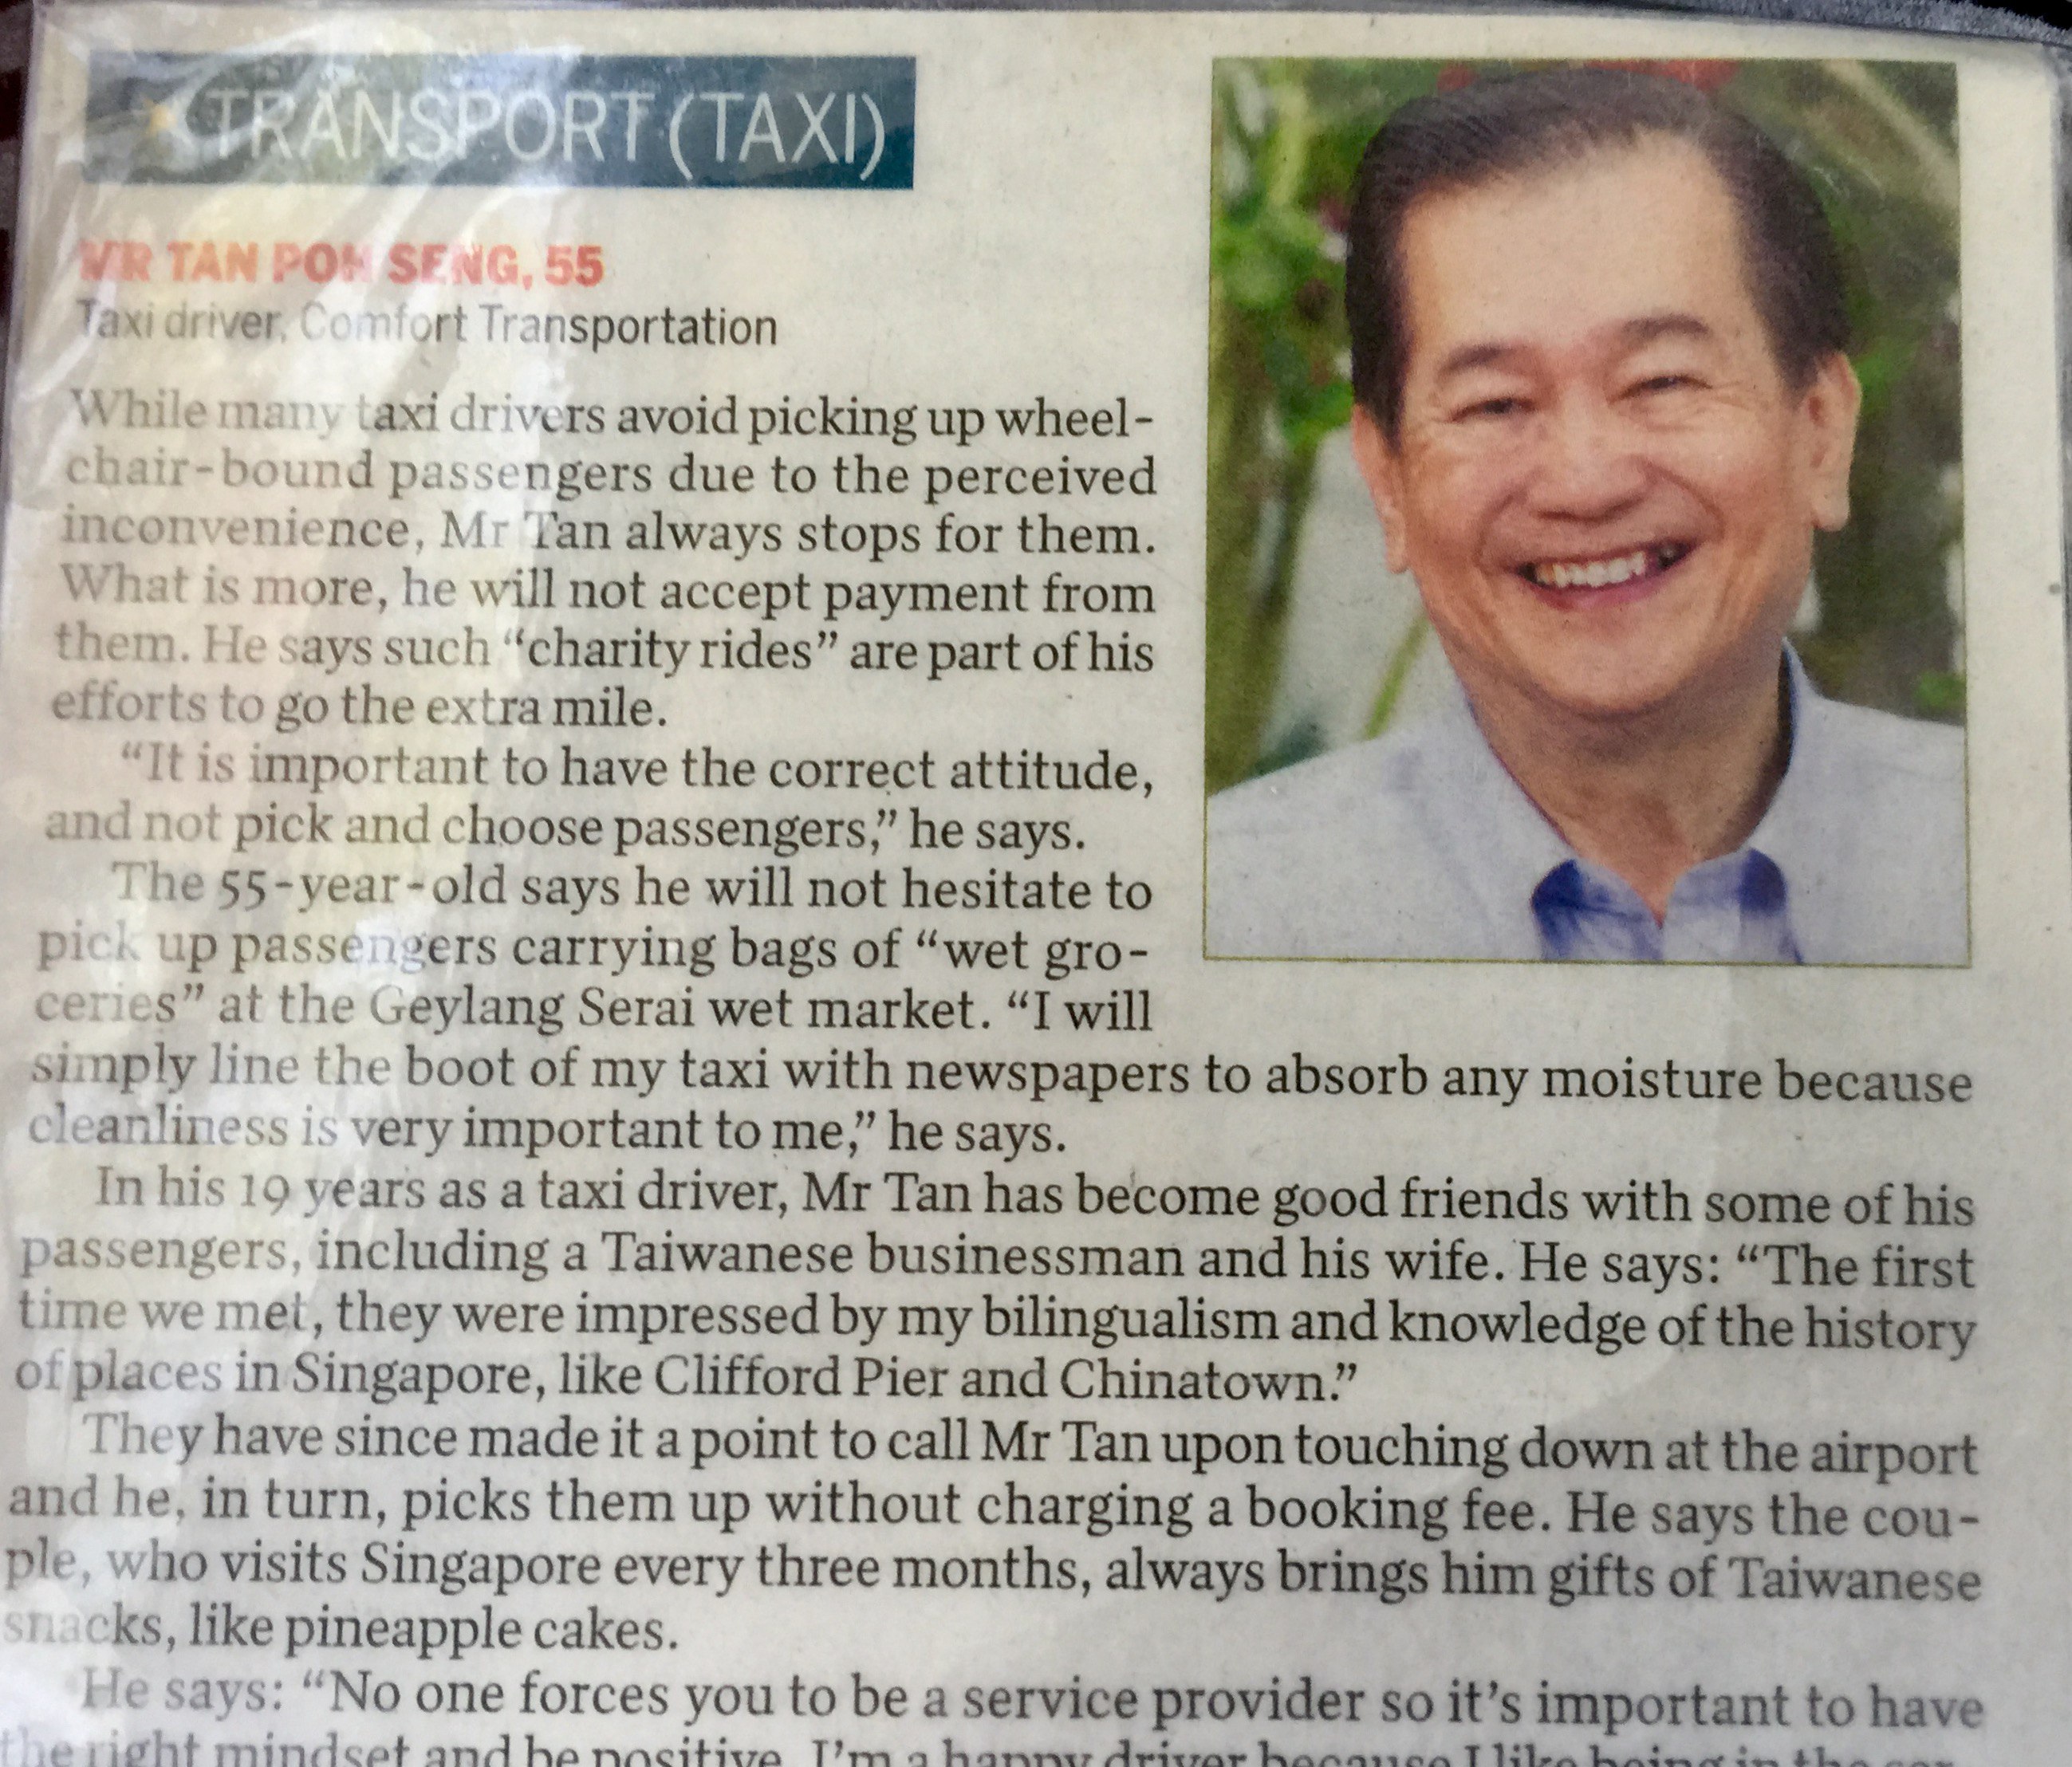 Just When You Least Expect It Kindness Sneaks Up and Finds You –  A Chance Meeting with Singapore’s Nicest Taxi Driver